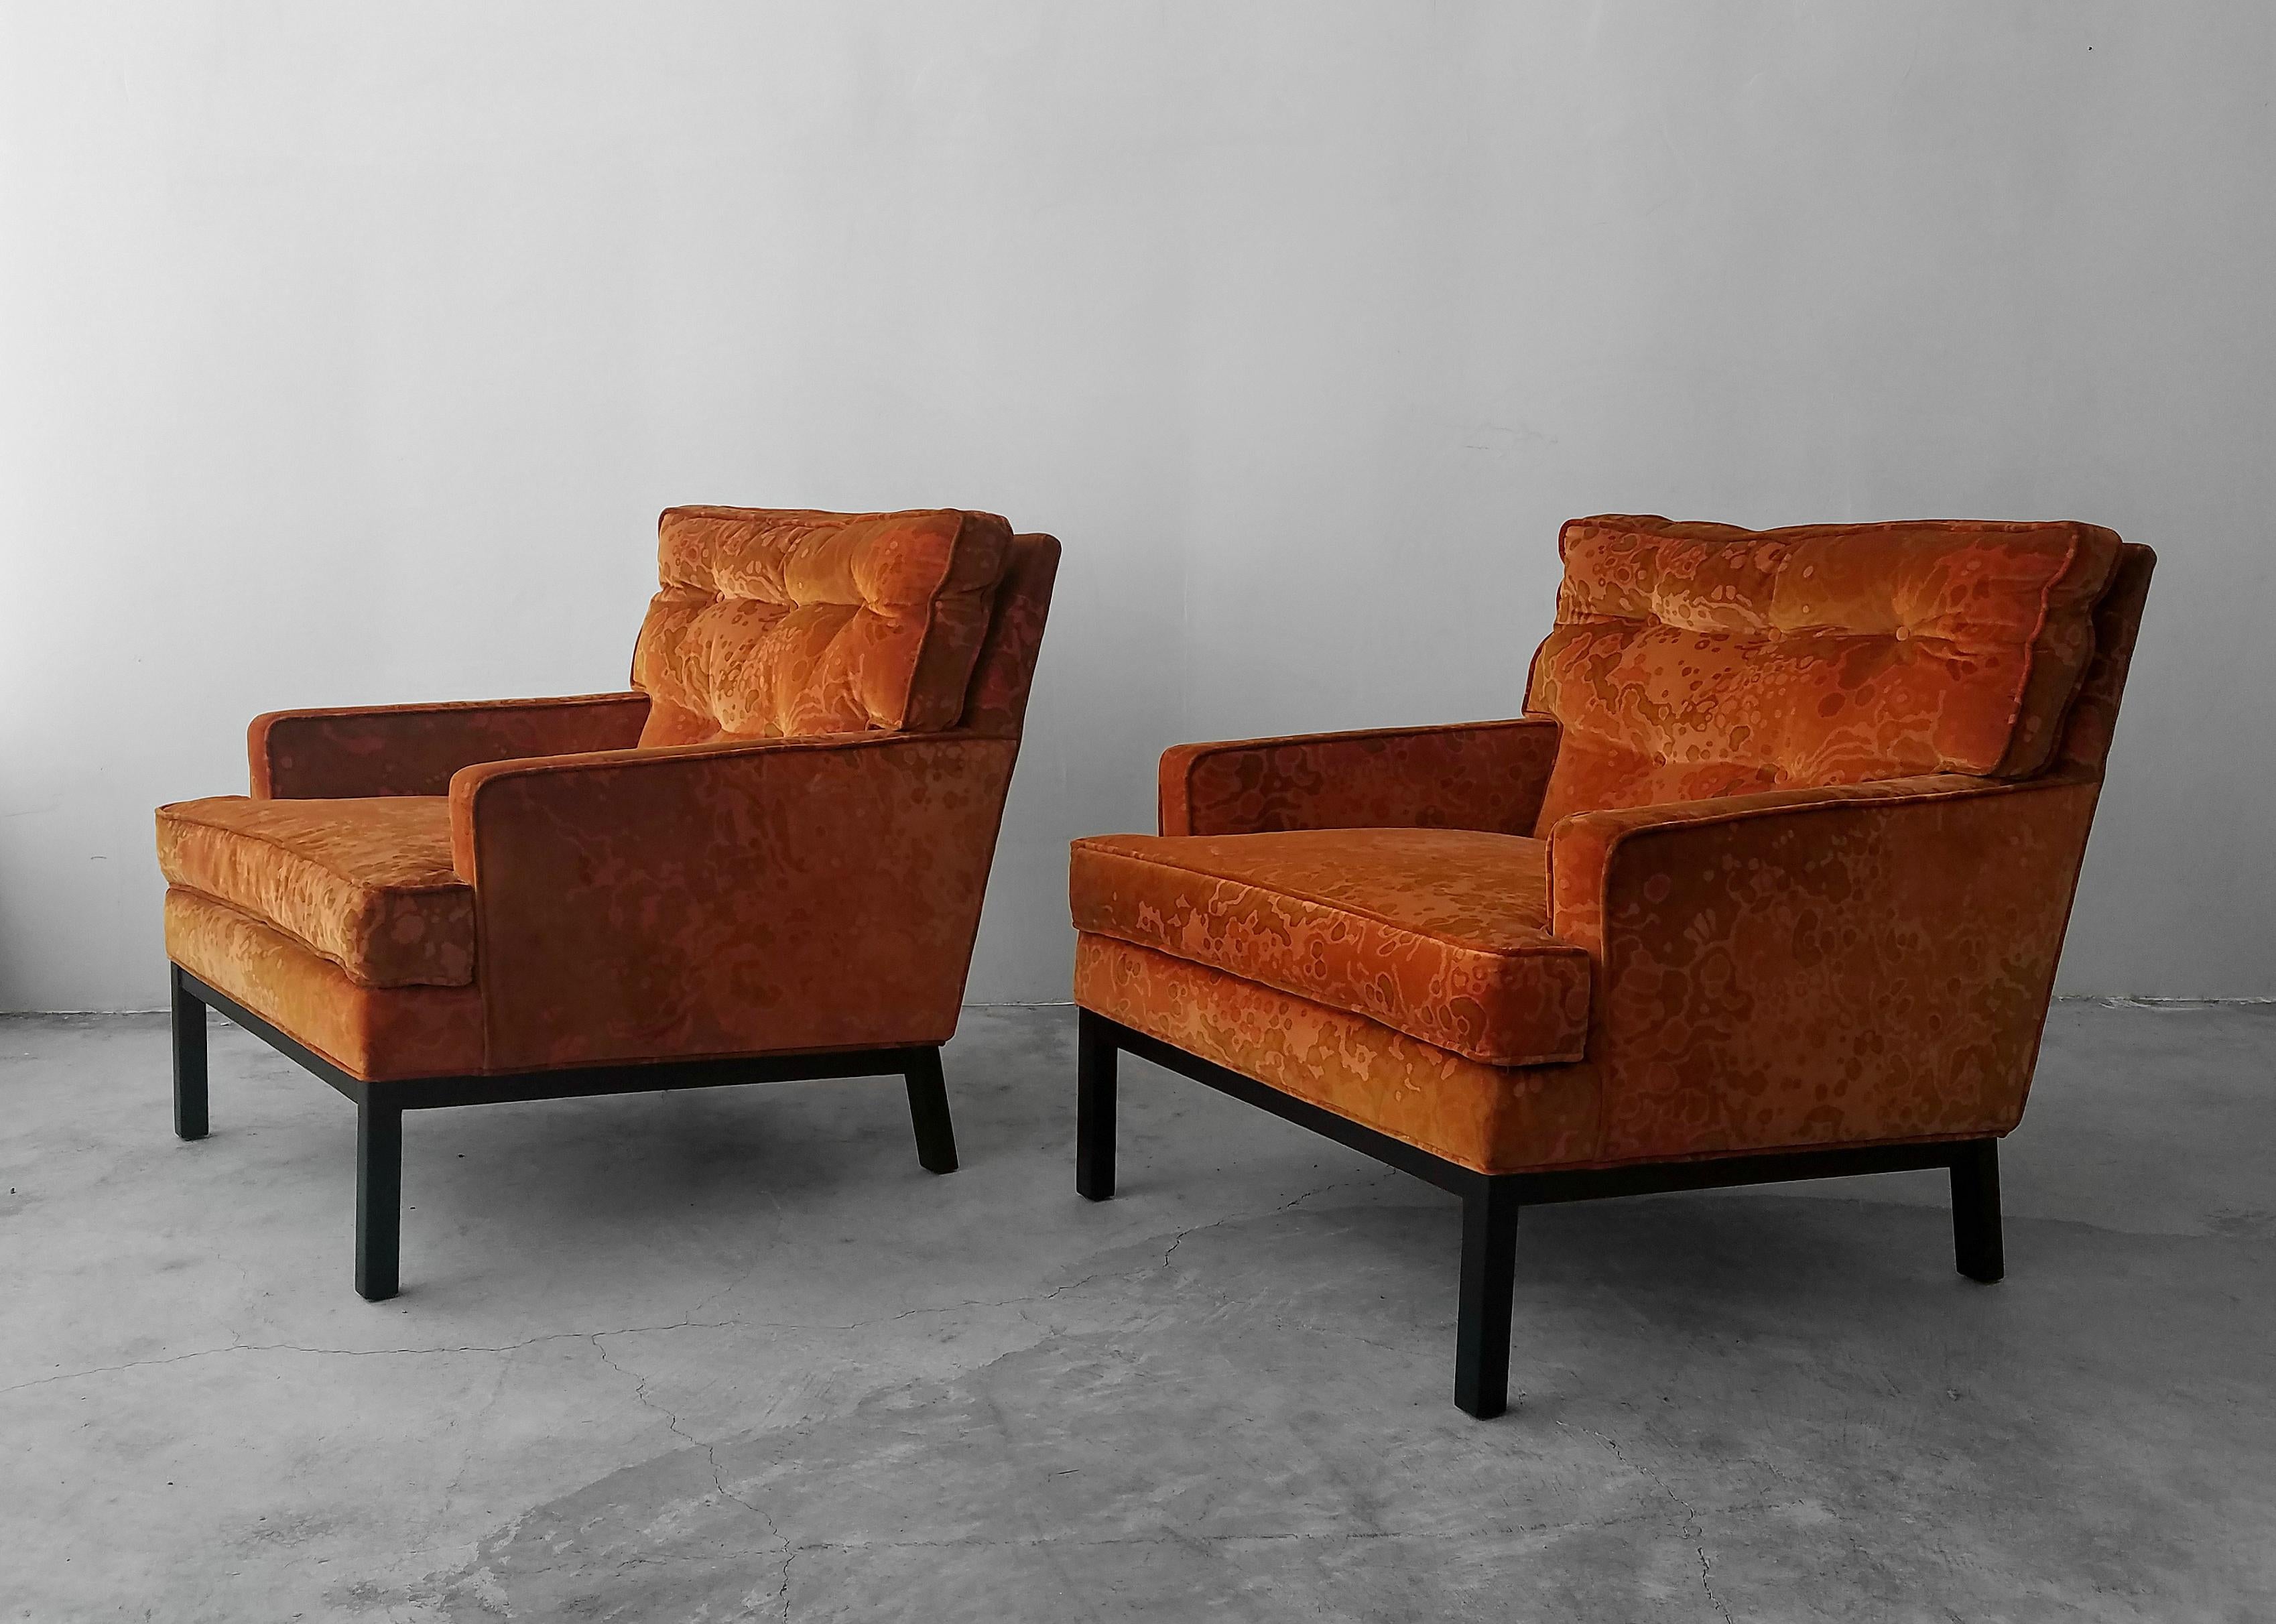 These funky Harvey Probber style lounge chairs are all original in their great burnt orange Jack Lenor Larsen velvet. A rare find. Perfect for someone vamping a 1970s shag pad or a Palm Springs ranch.

Chairs, including the velvet, are in